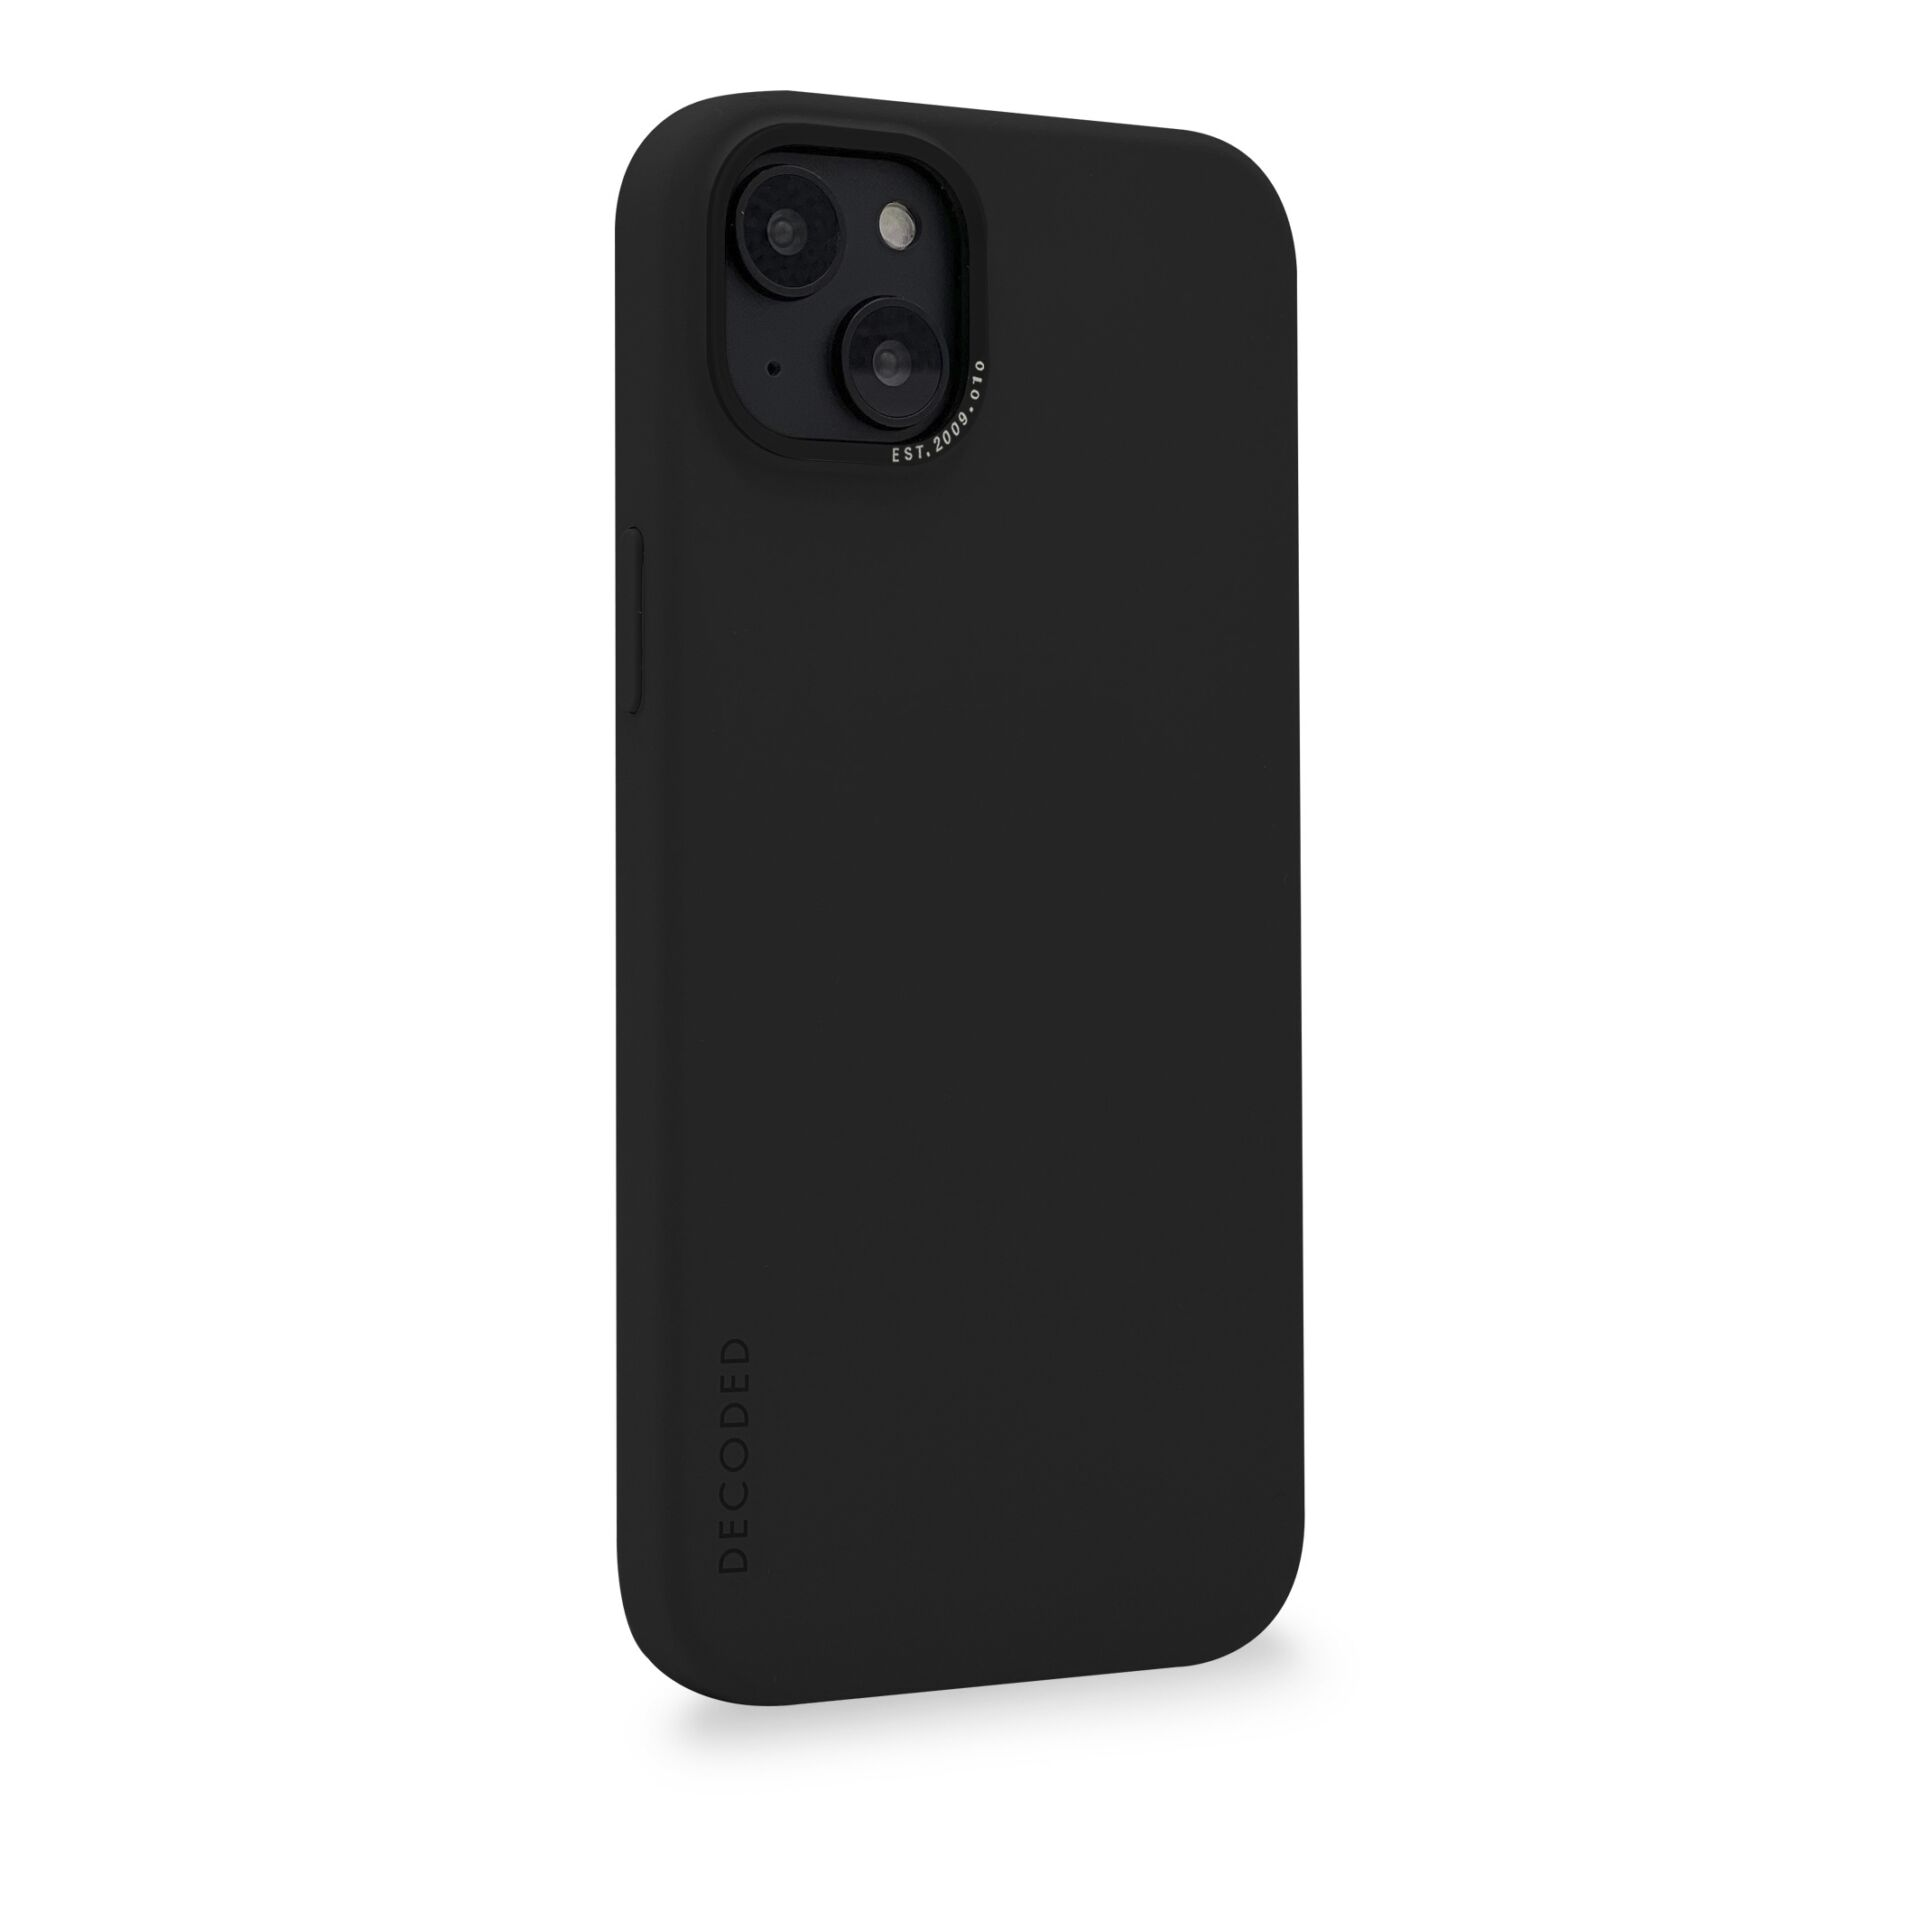 Plus, Charcoal Backcover, AntiMicrobial DECODED Silicone iPhone Apple, Charcoal, 14 Backcover